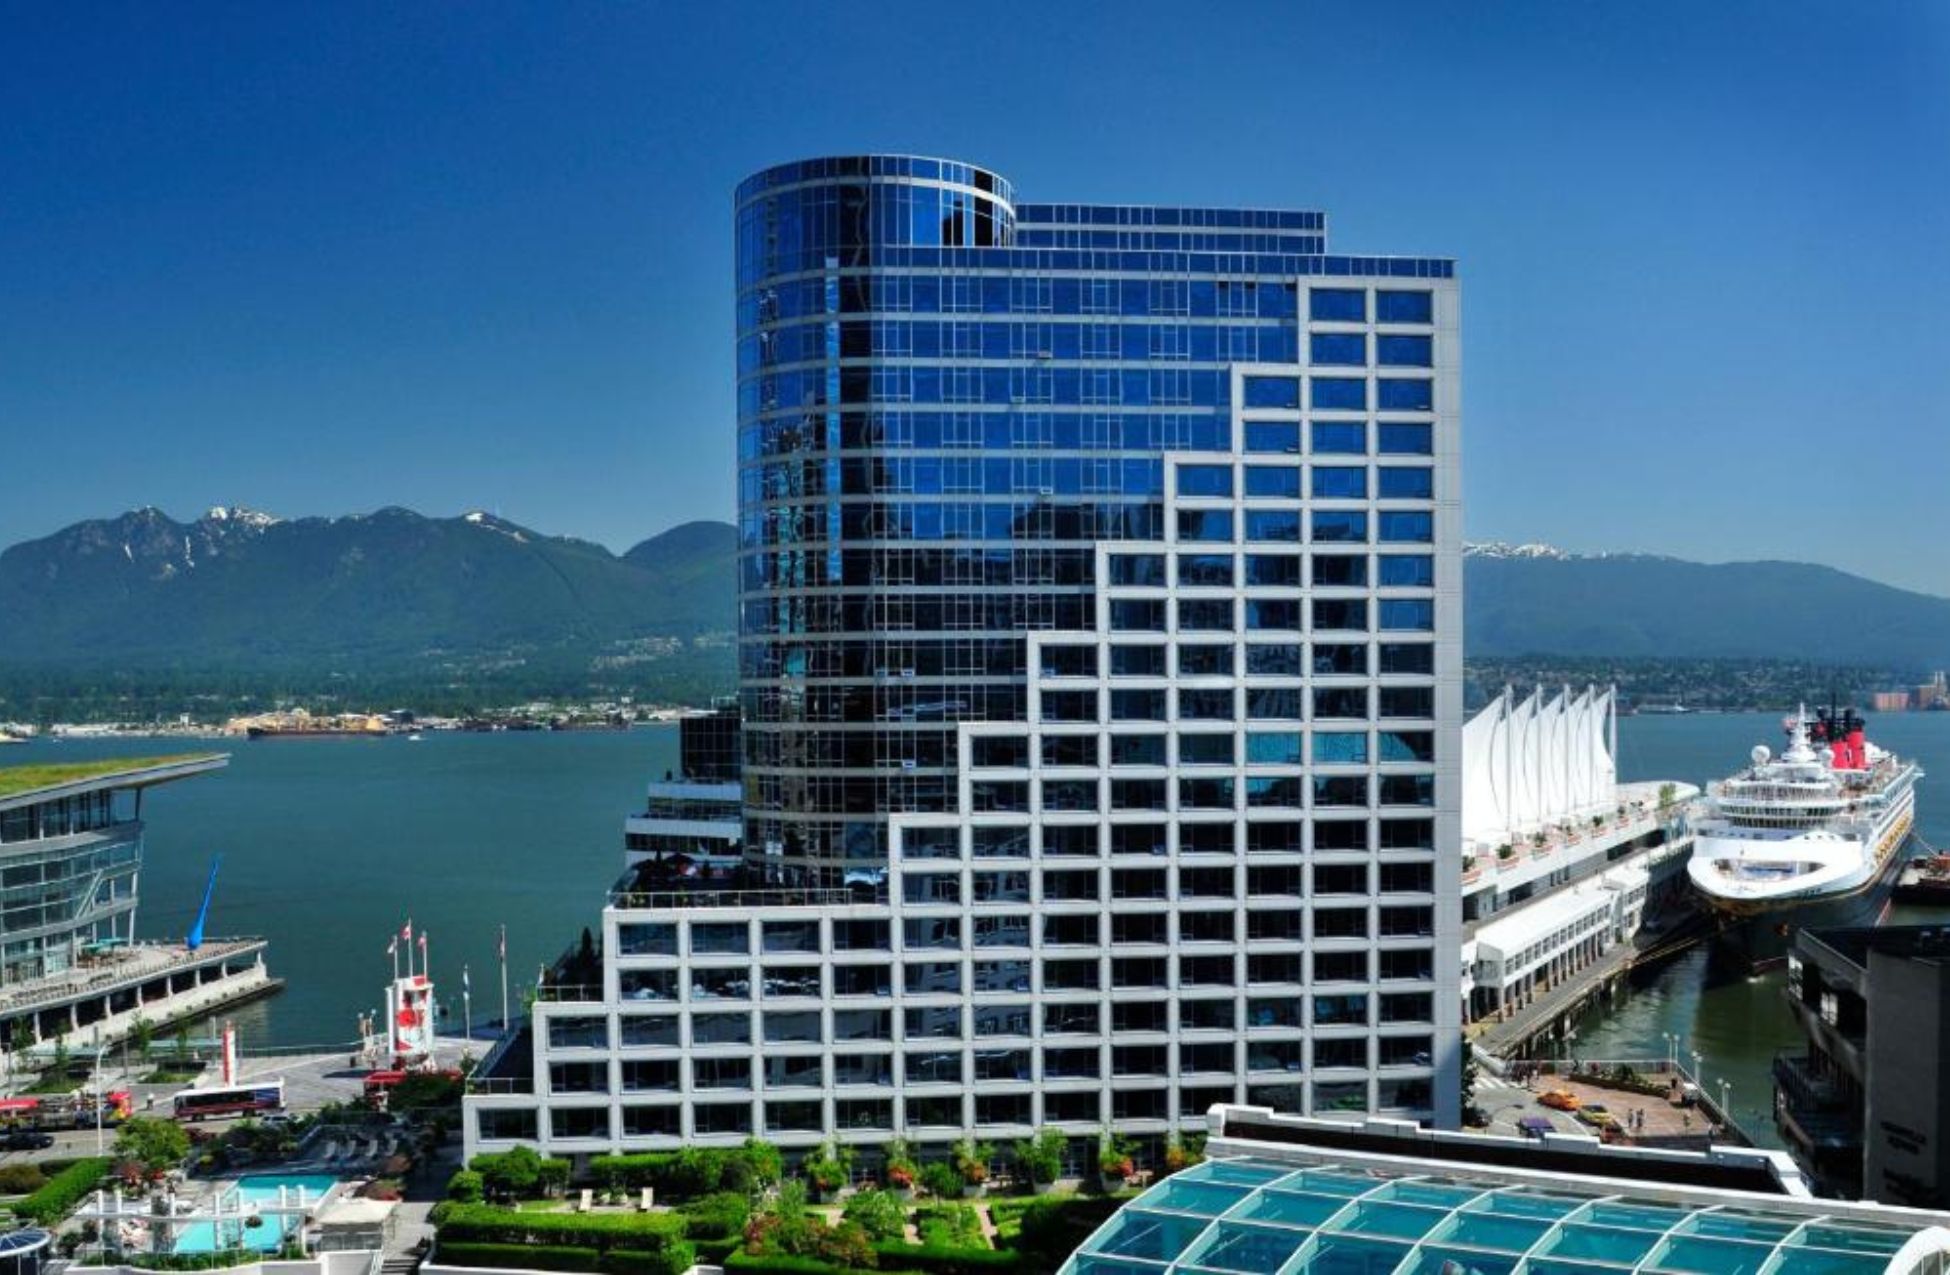 Fairmont Waterfront - Best Hotels In Vancouver